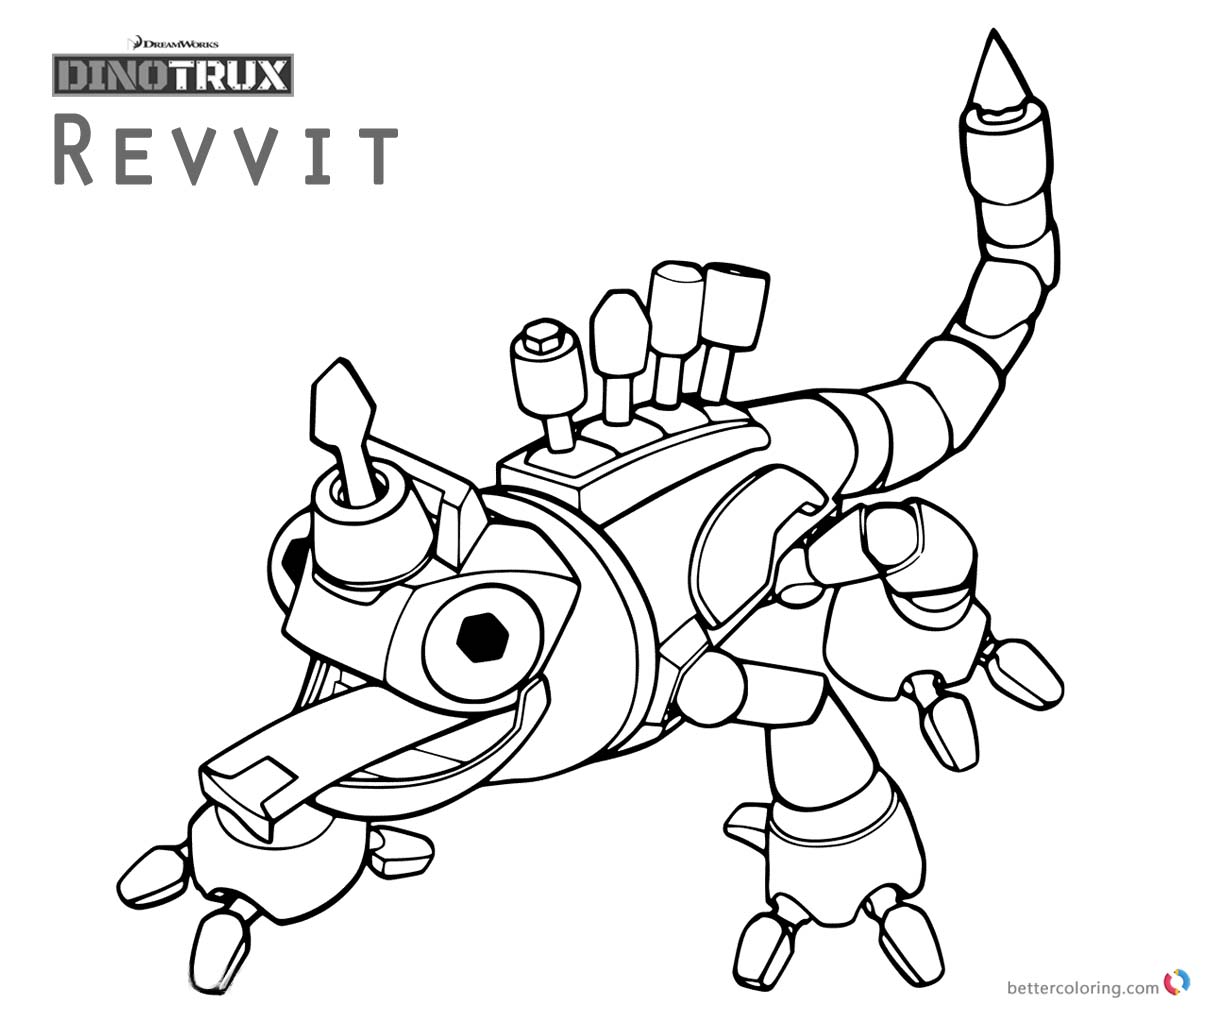 Dinotrux Revvit coloring pages black and white printable